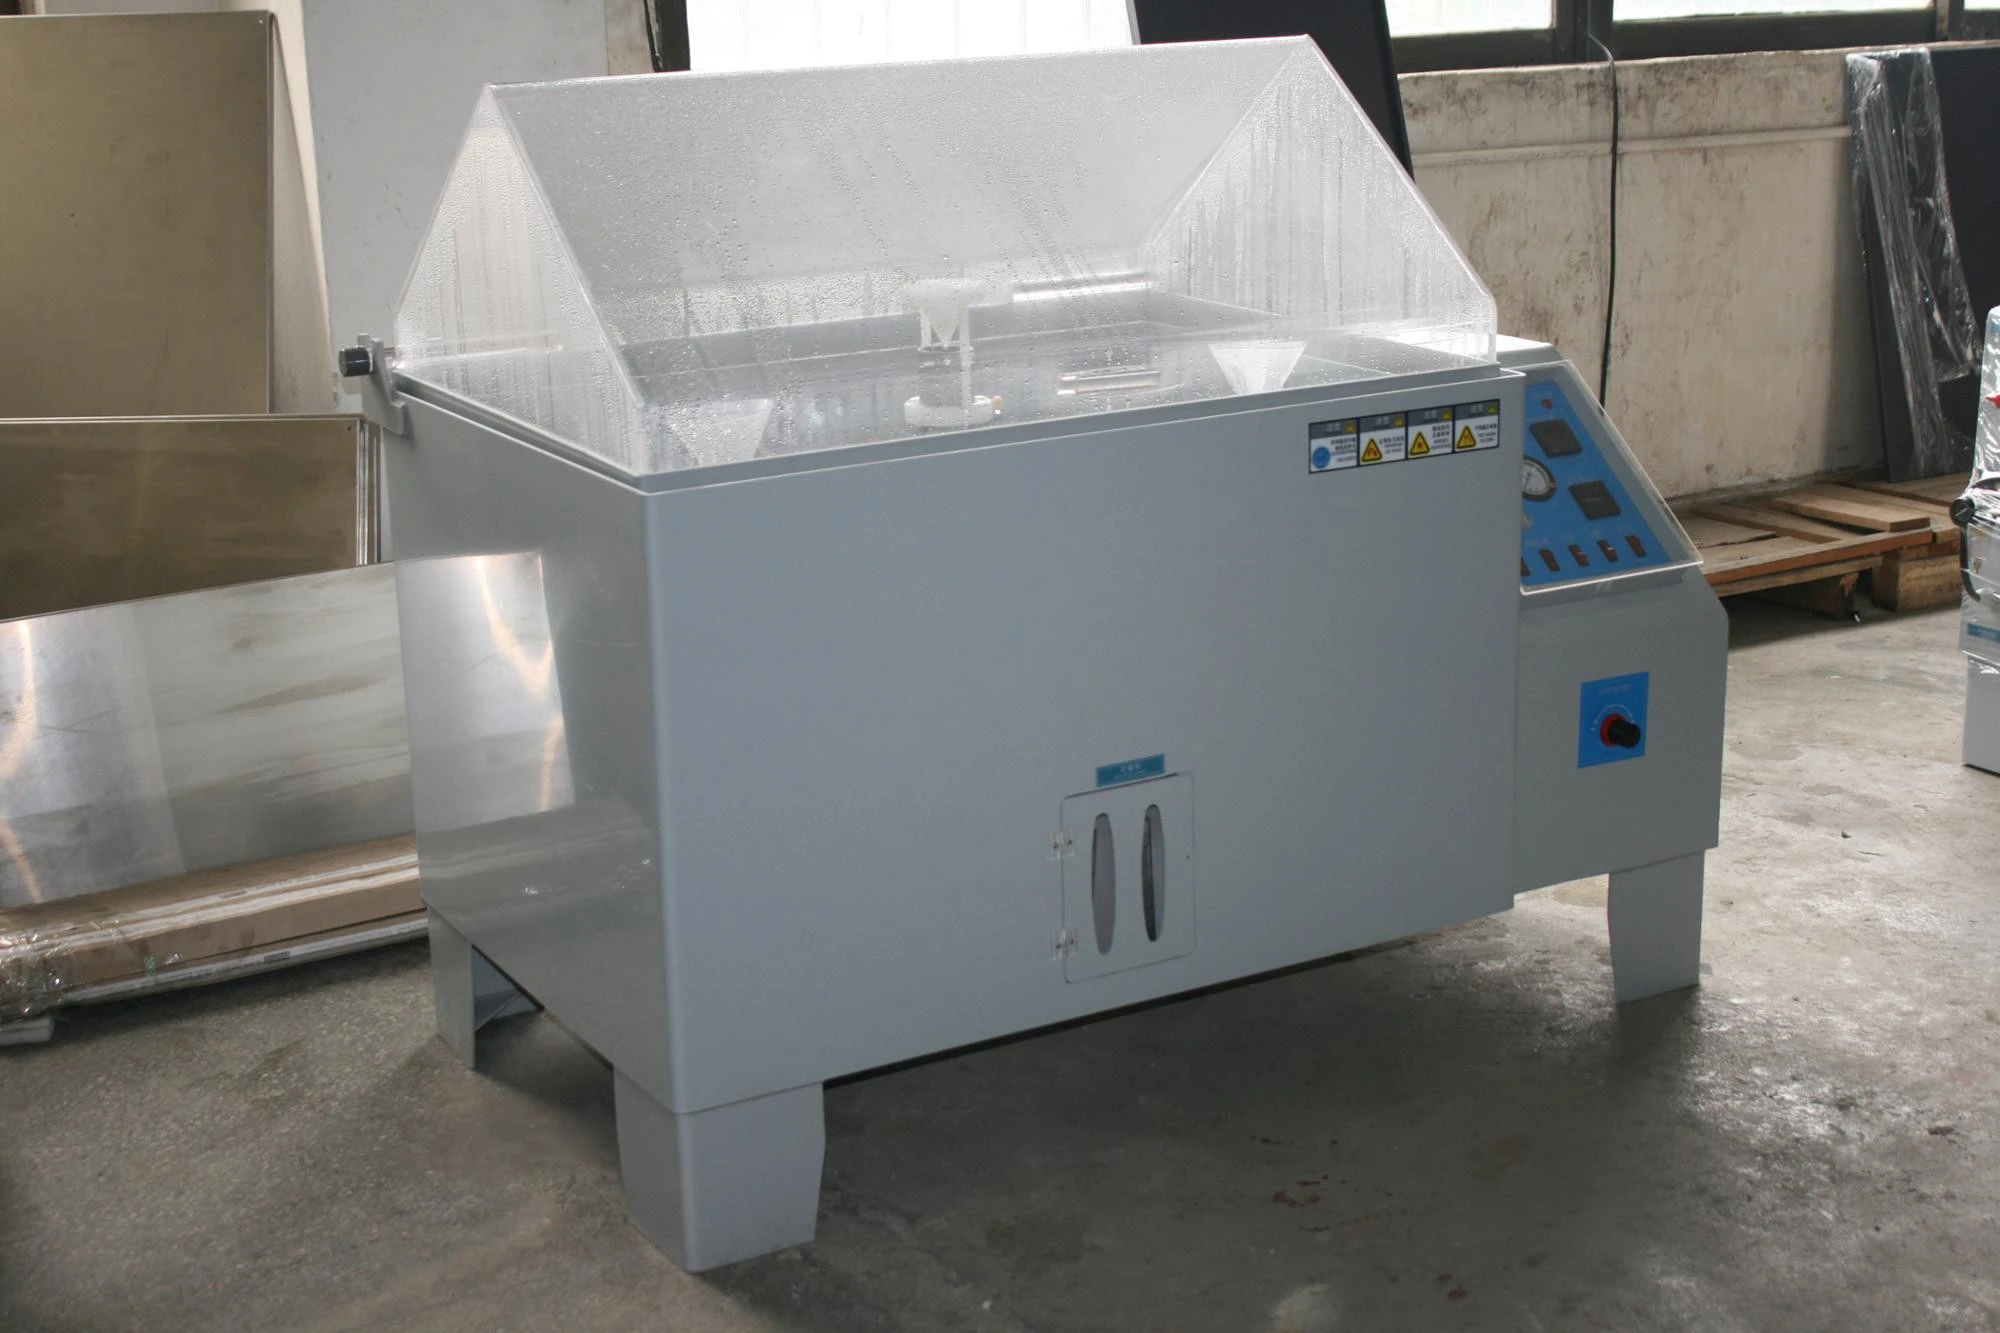 Factory price programmable astm b117 salt spray test booth/measuring Instruments